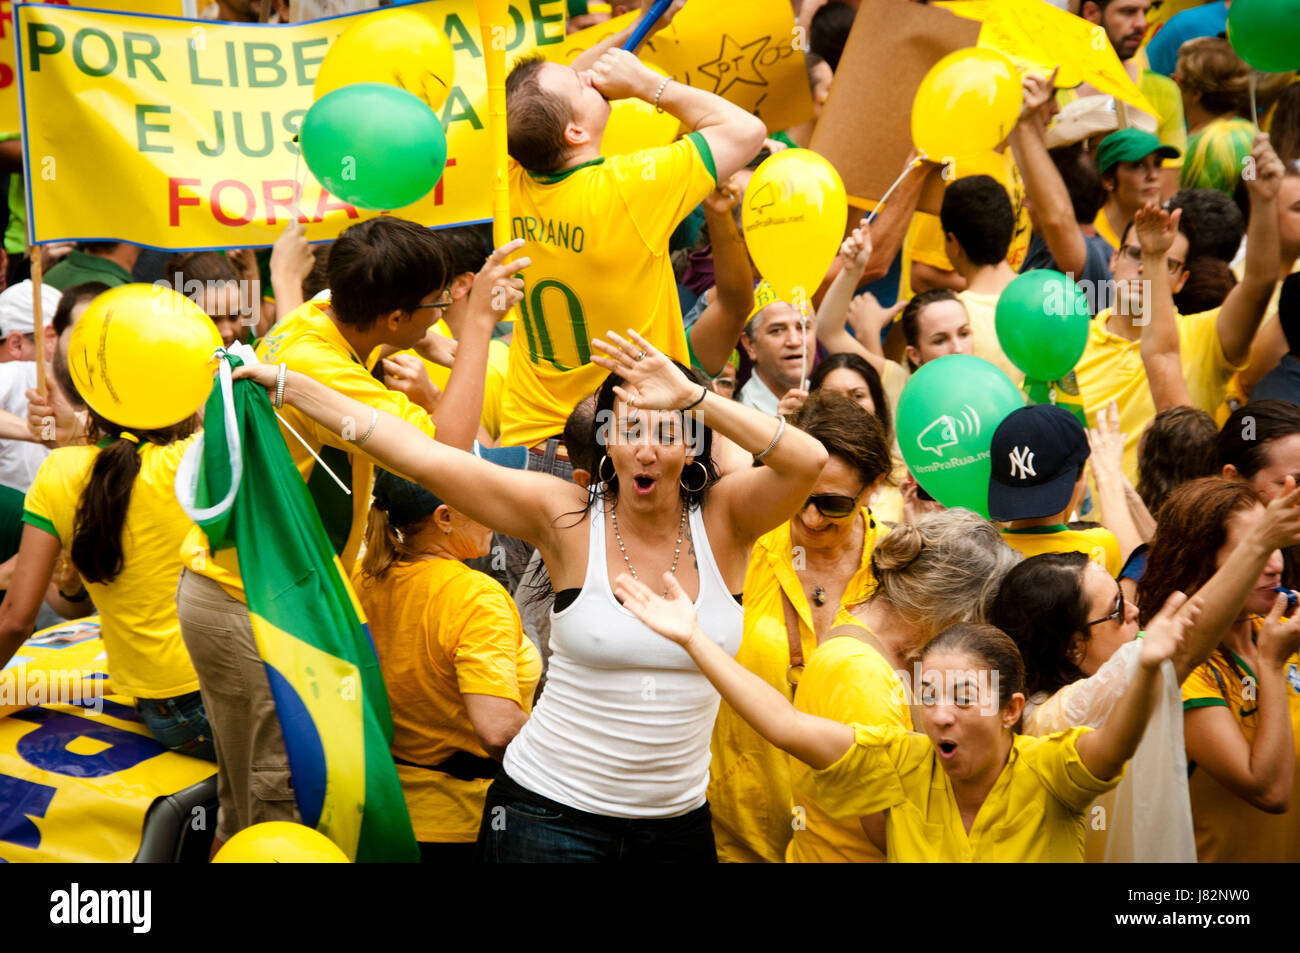 Protesters ask for impeachment in Brazil Stock Photo